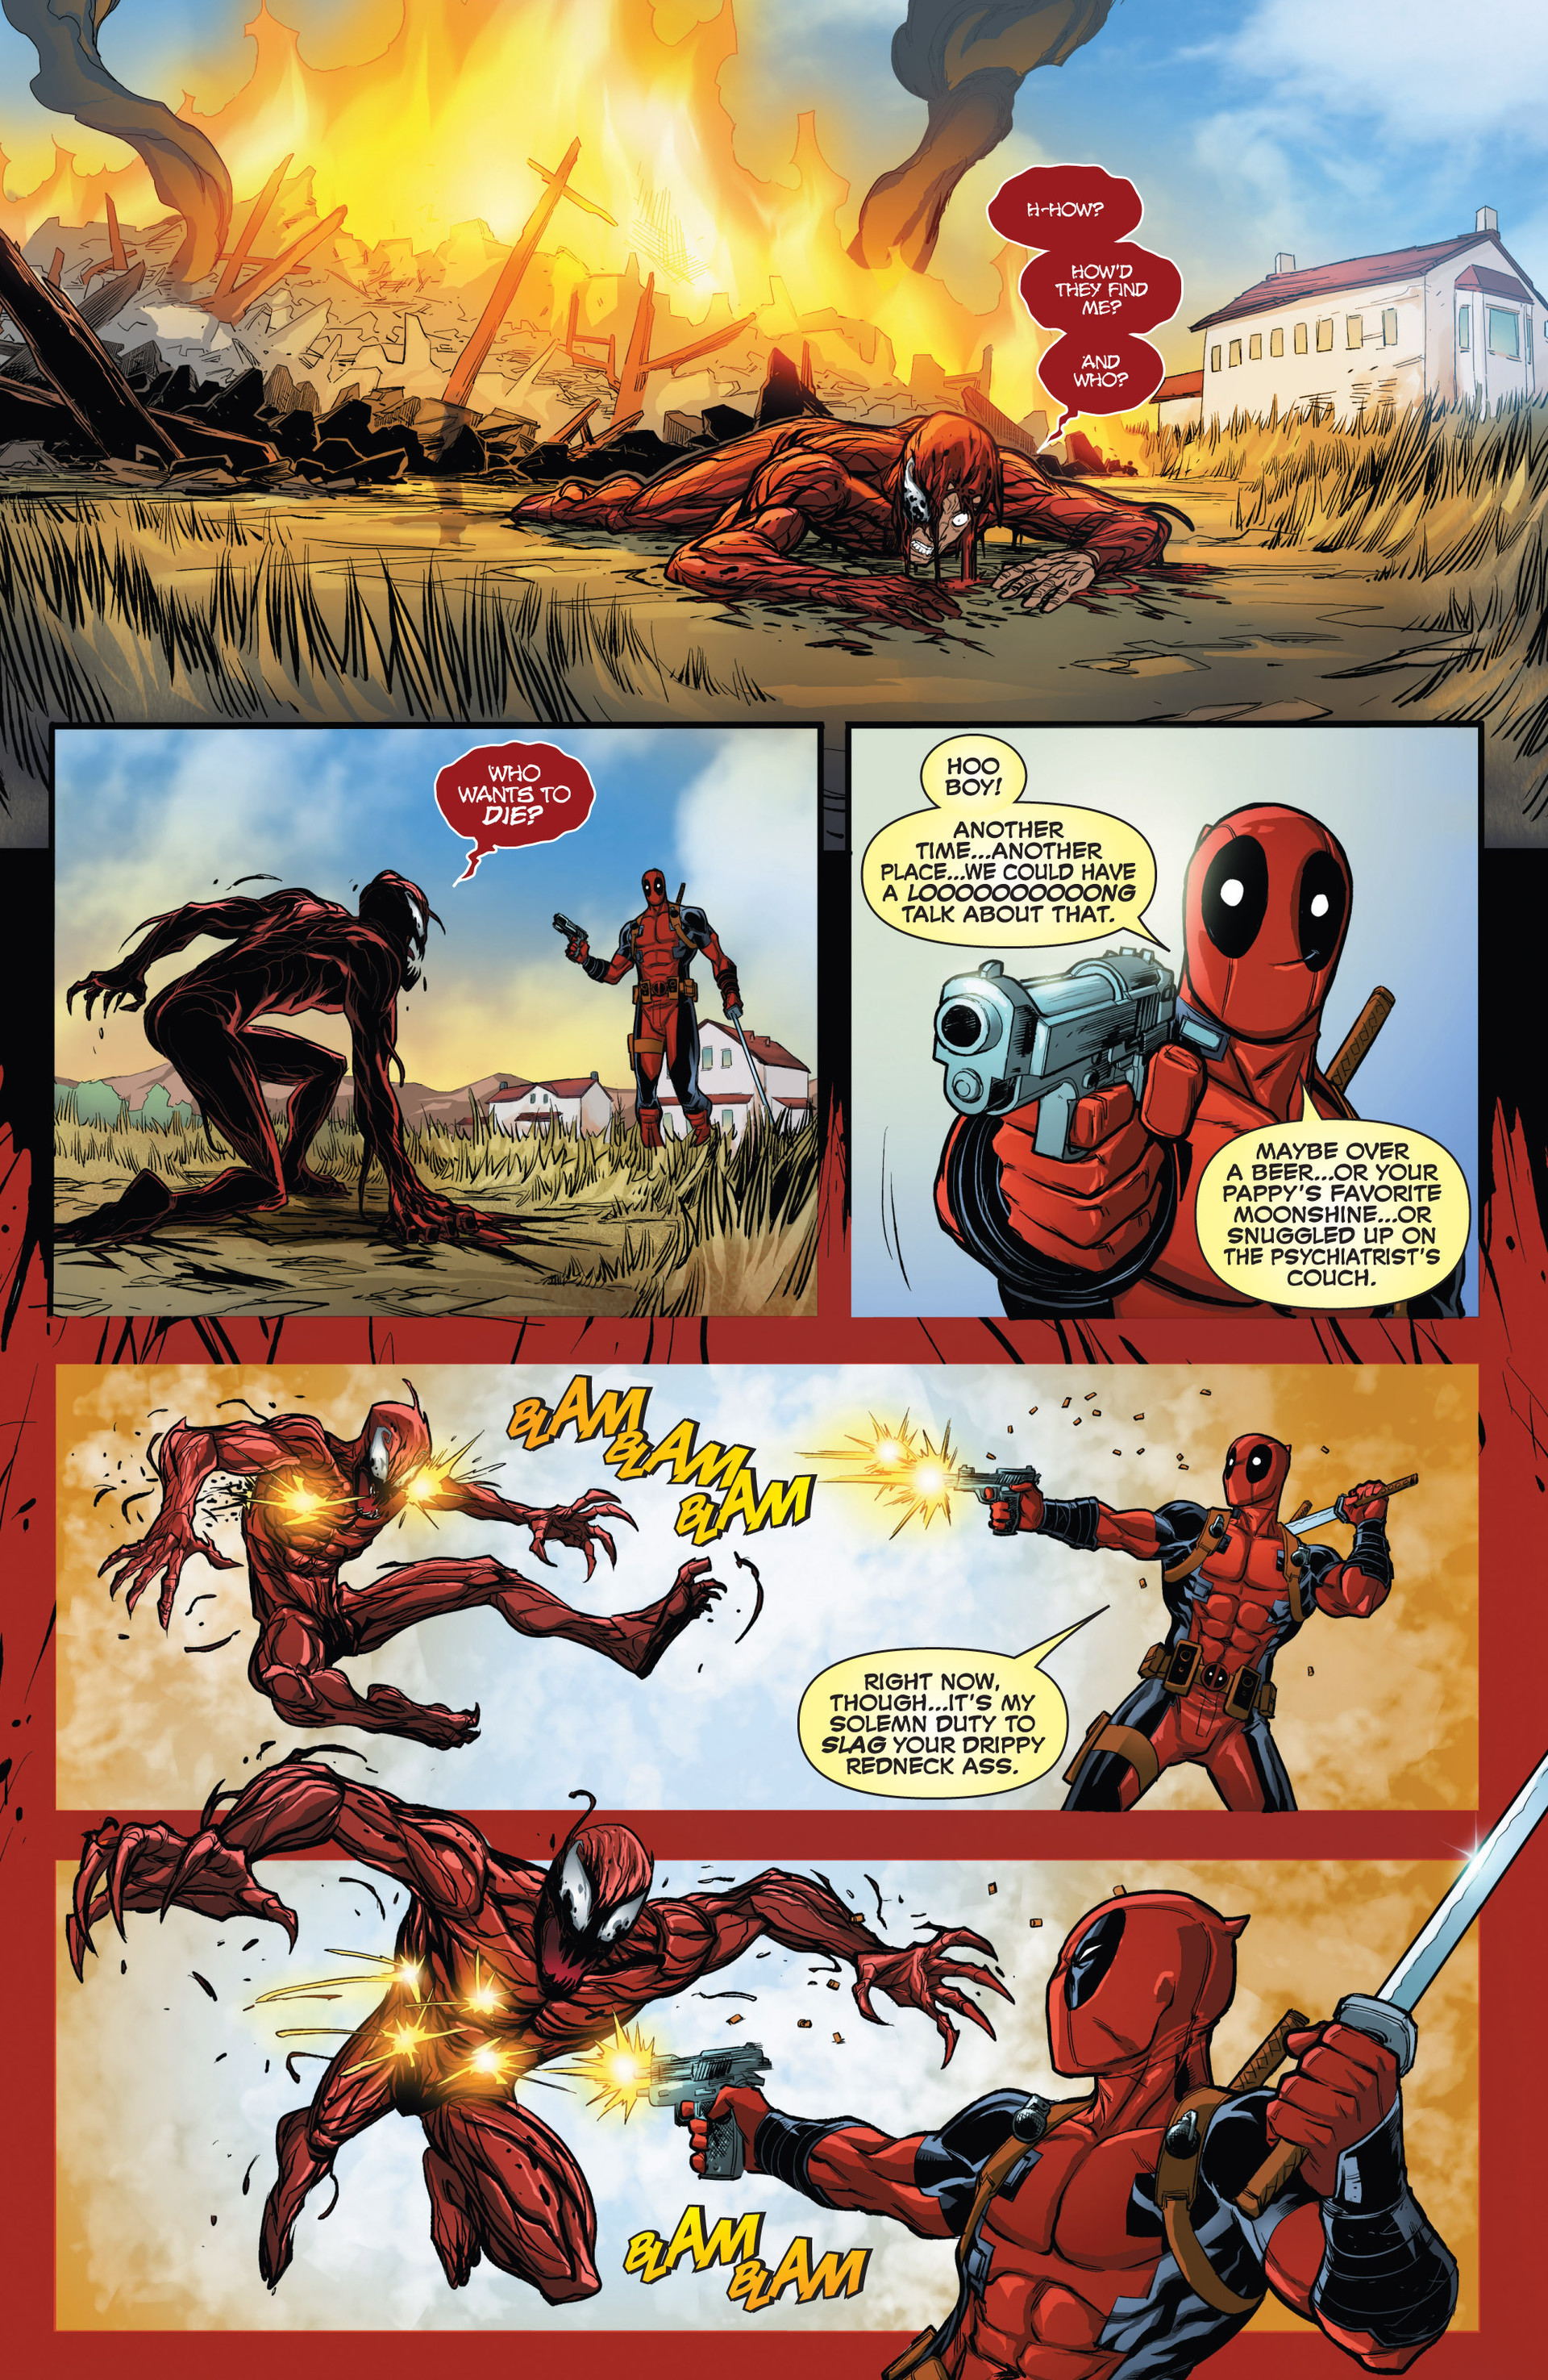 Read Online Deadpool Vs Carnage Comic Issue 1